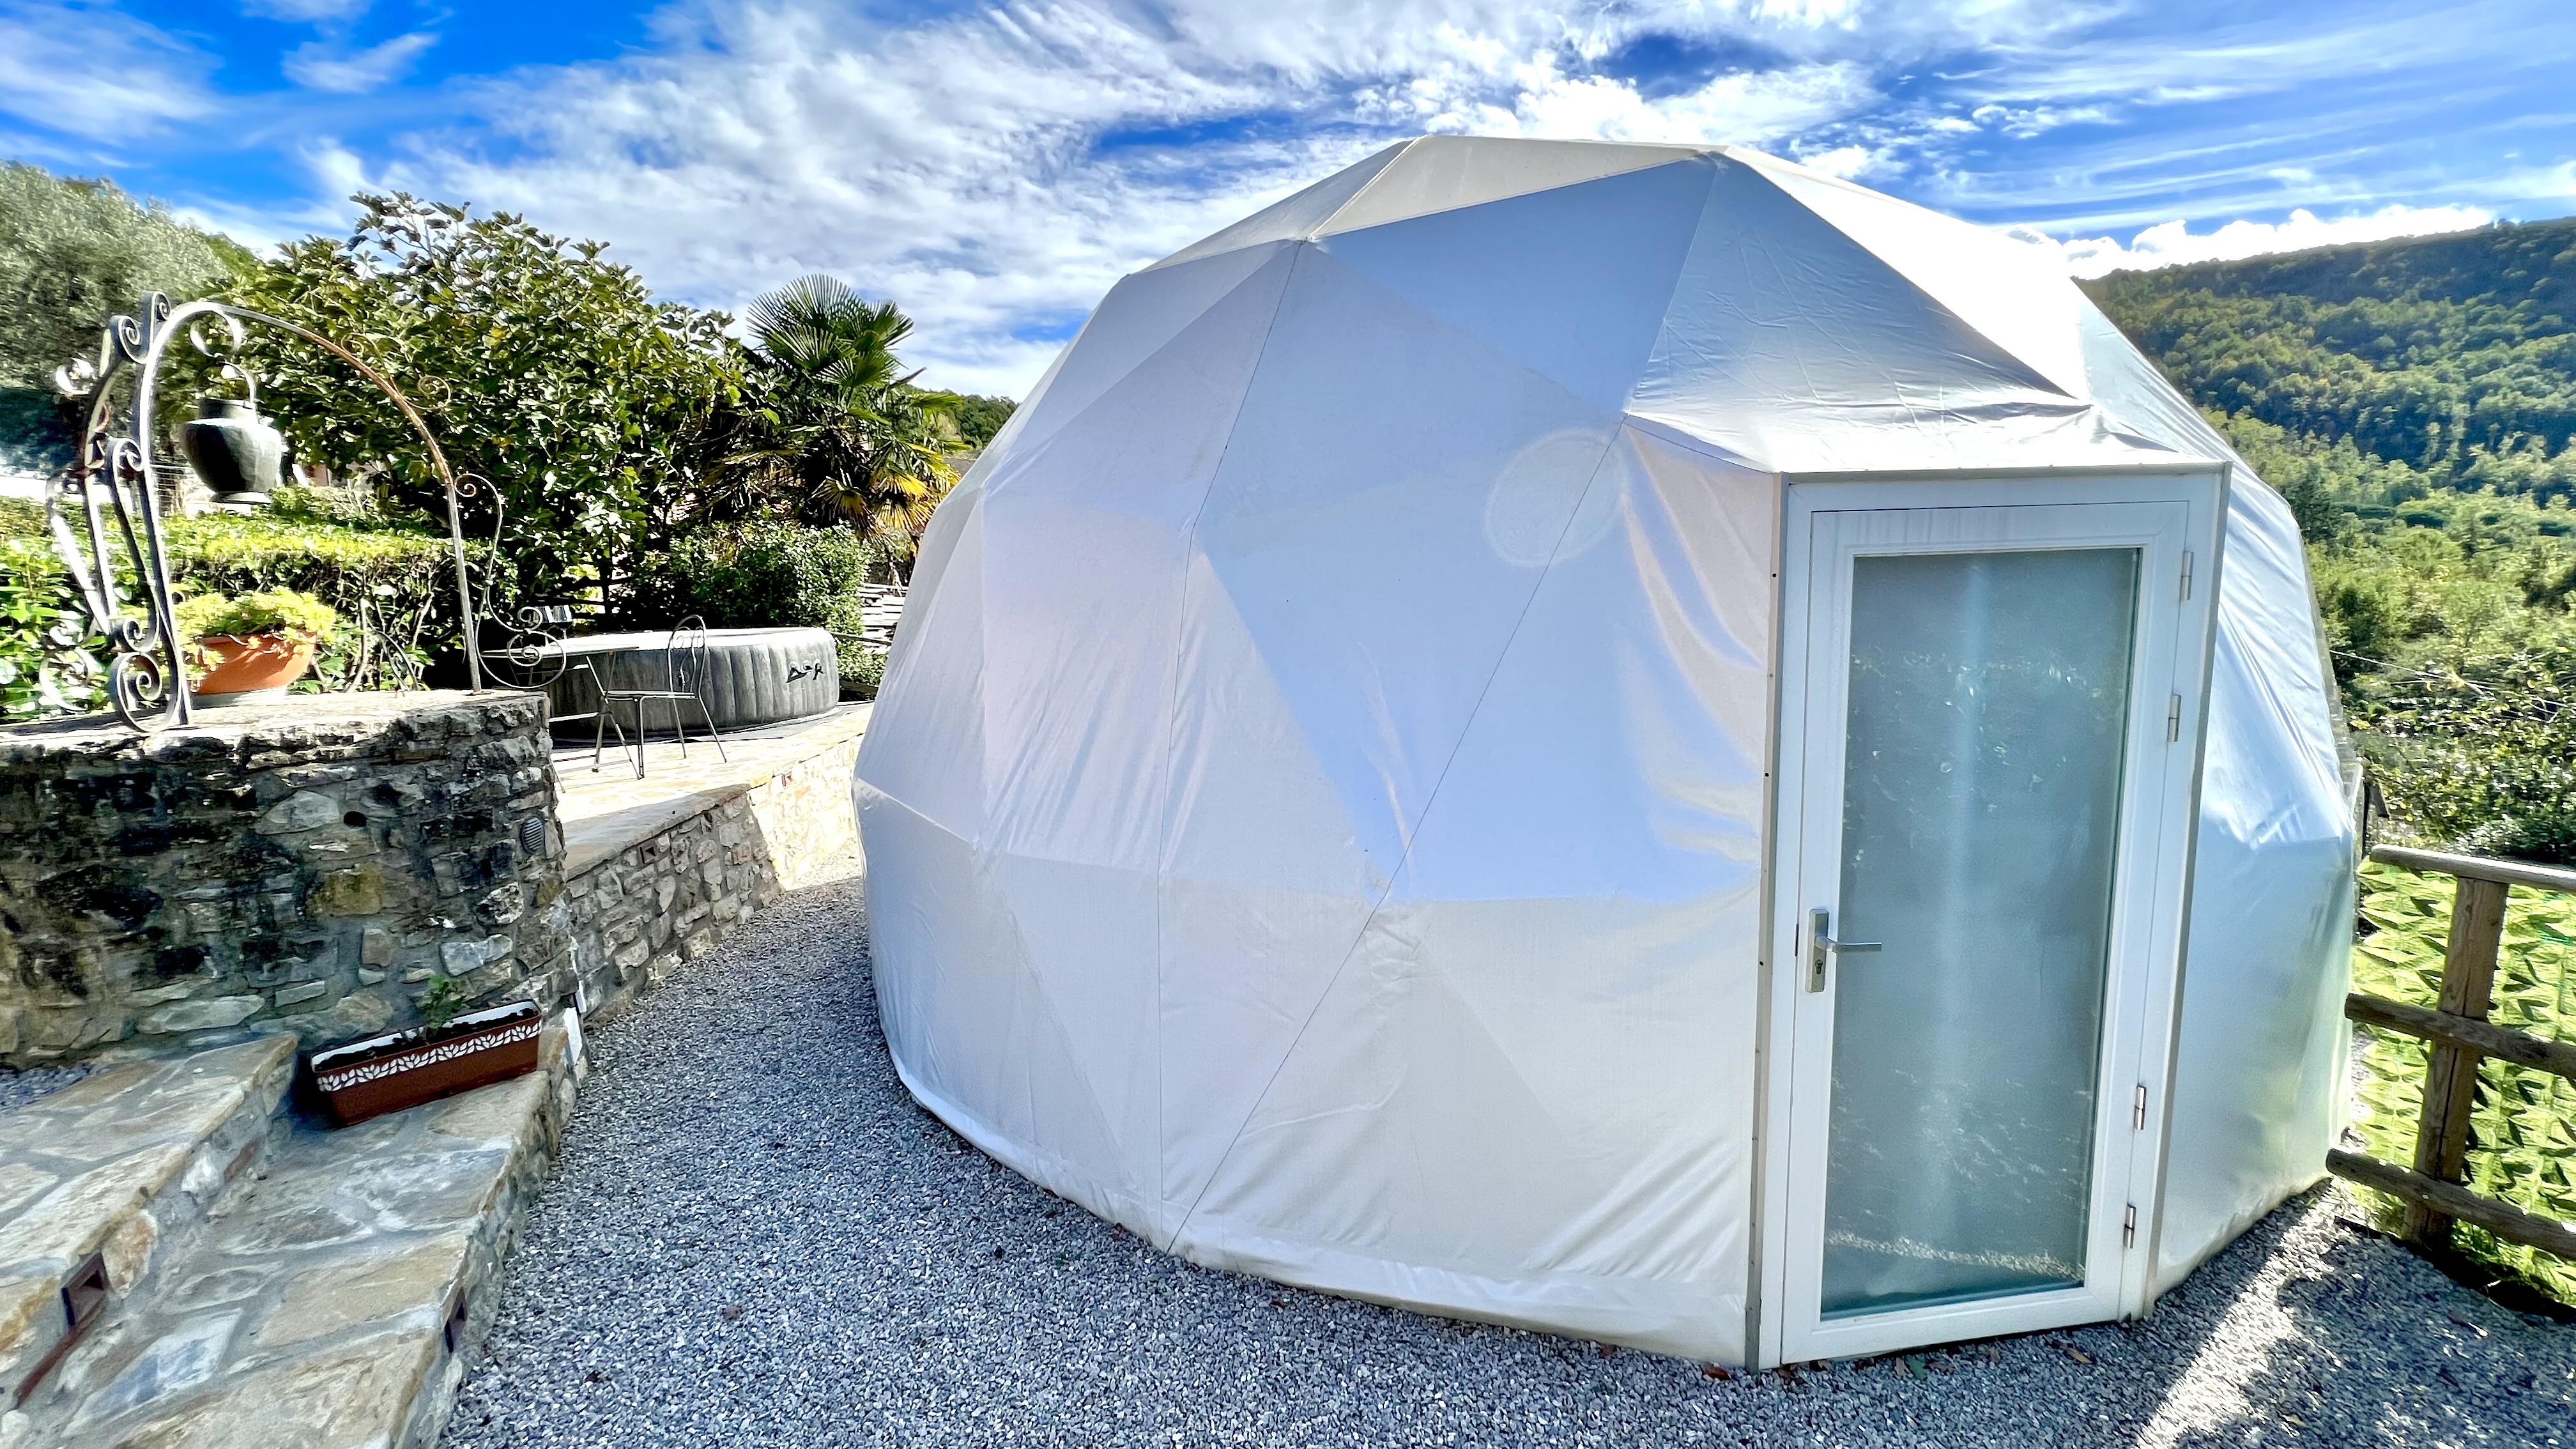 Glamping in cupola geodetica in Umbria